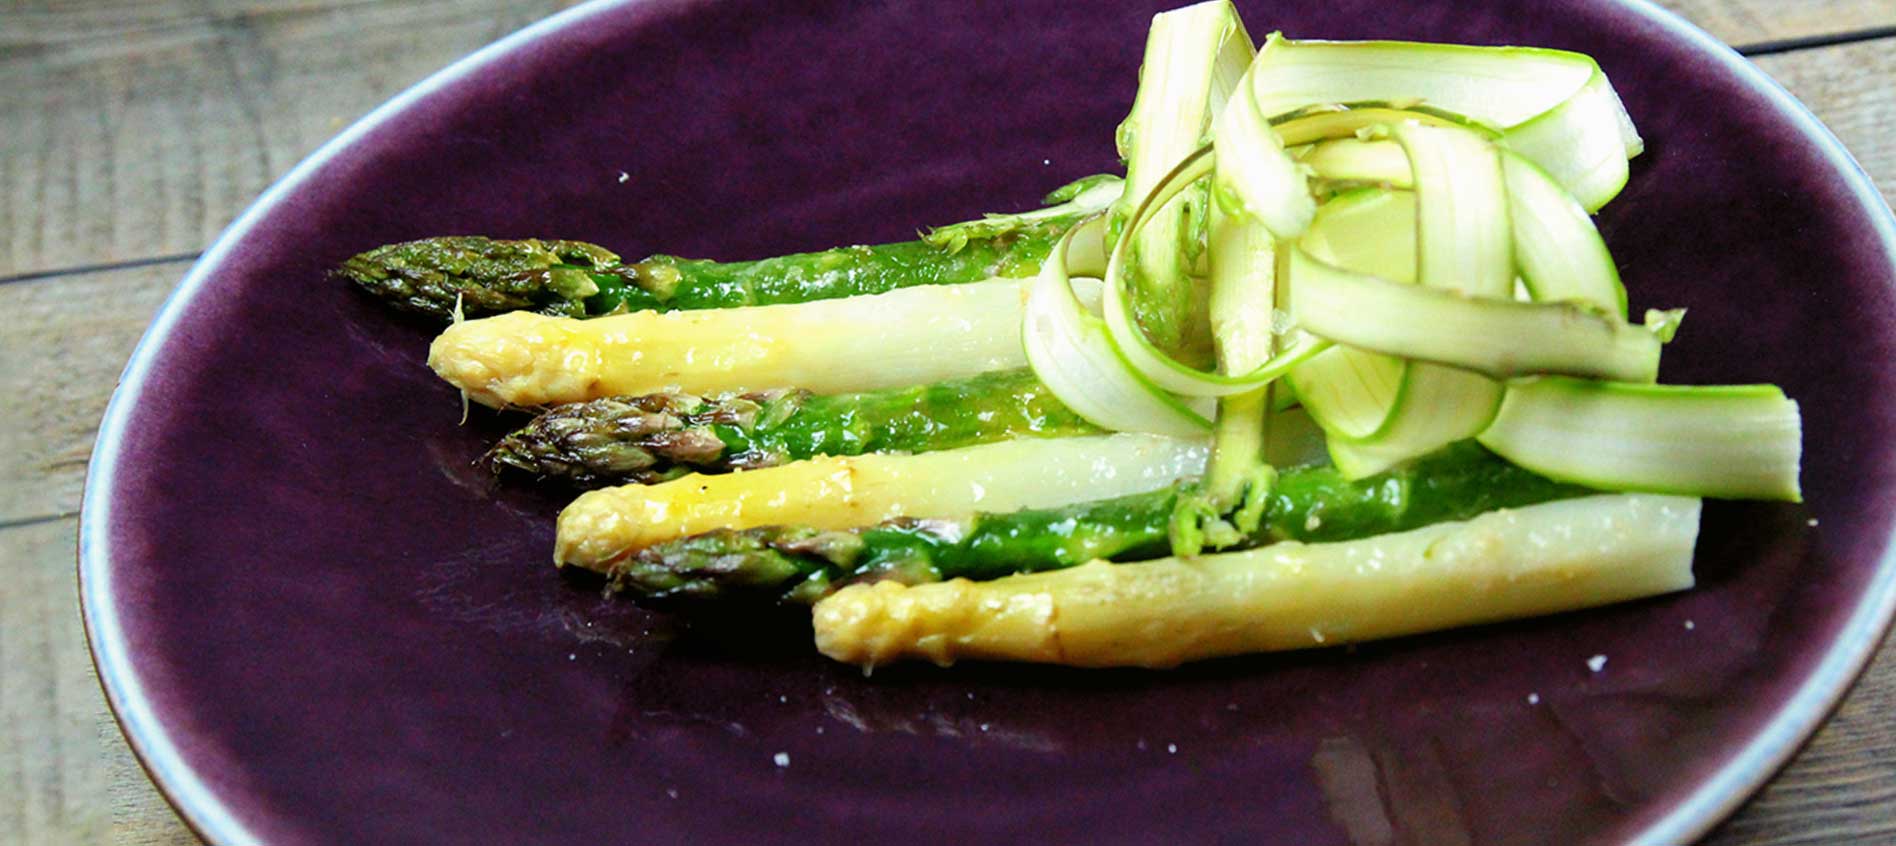 Roasted asparagus with parmesan cheese Ducasse style  